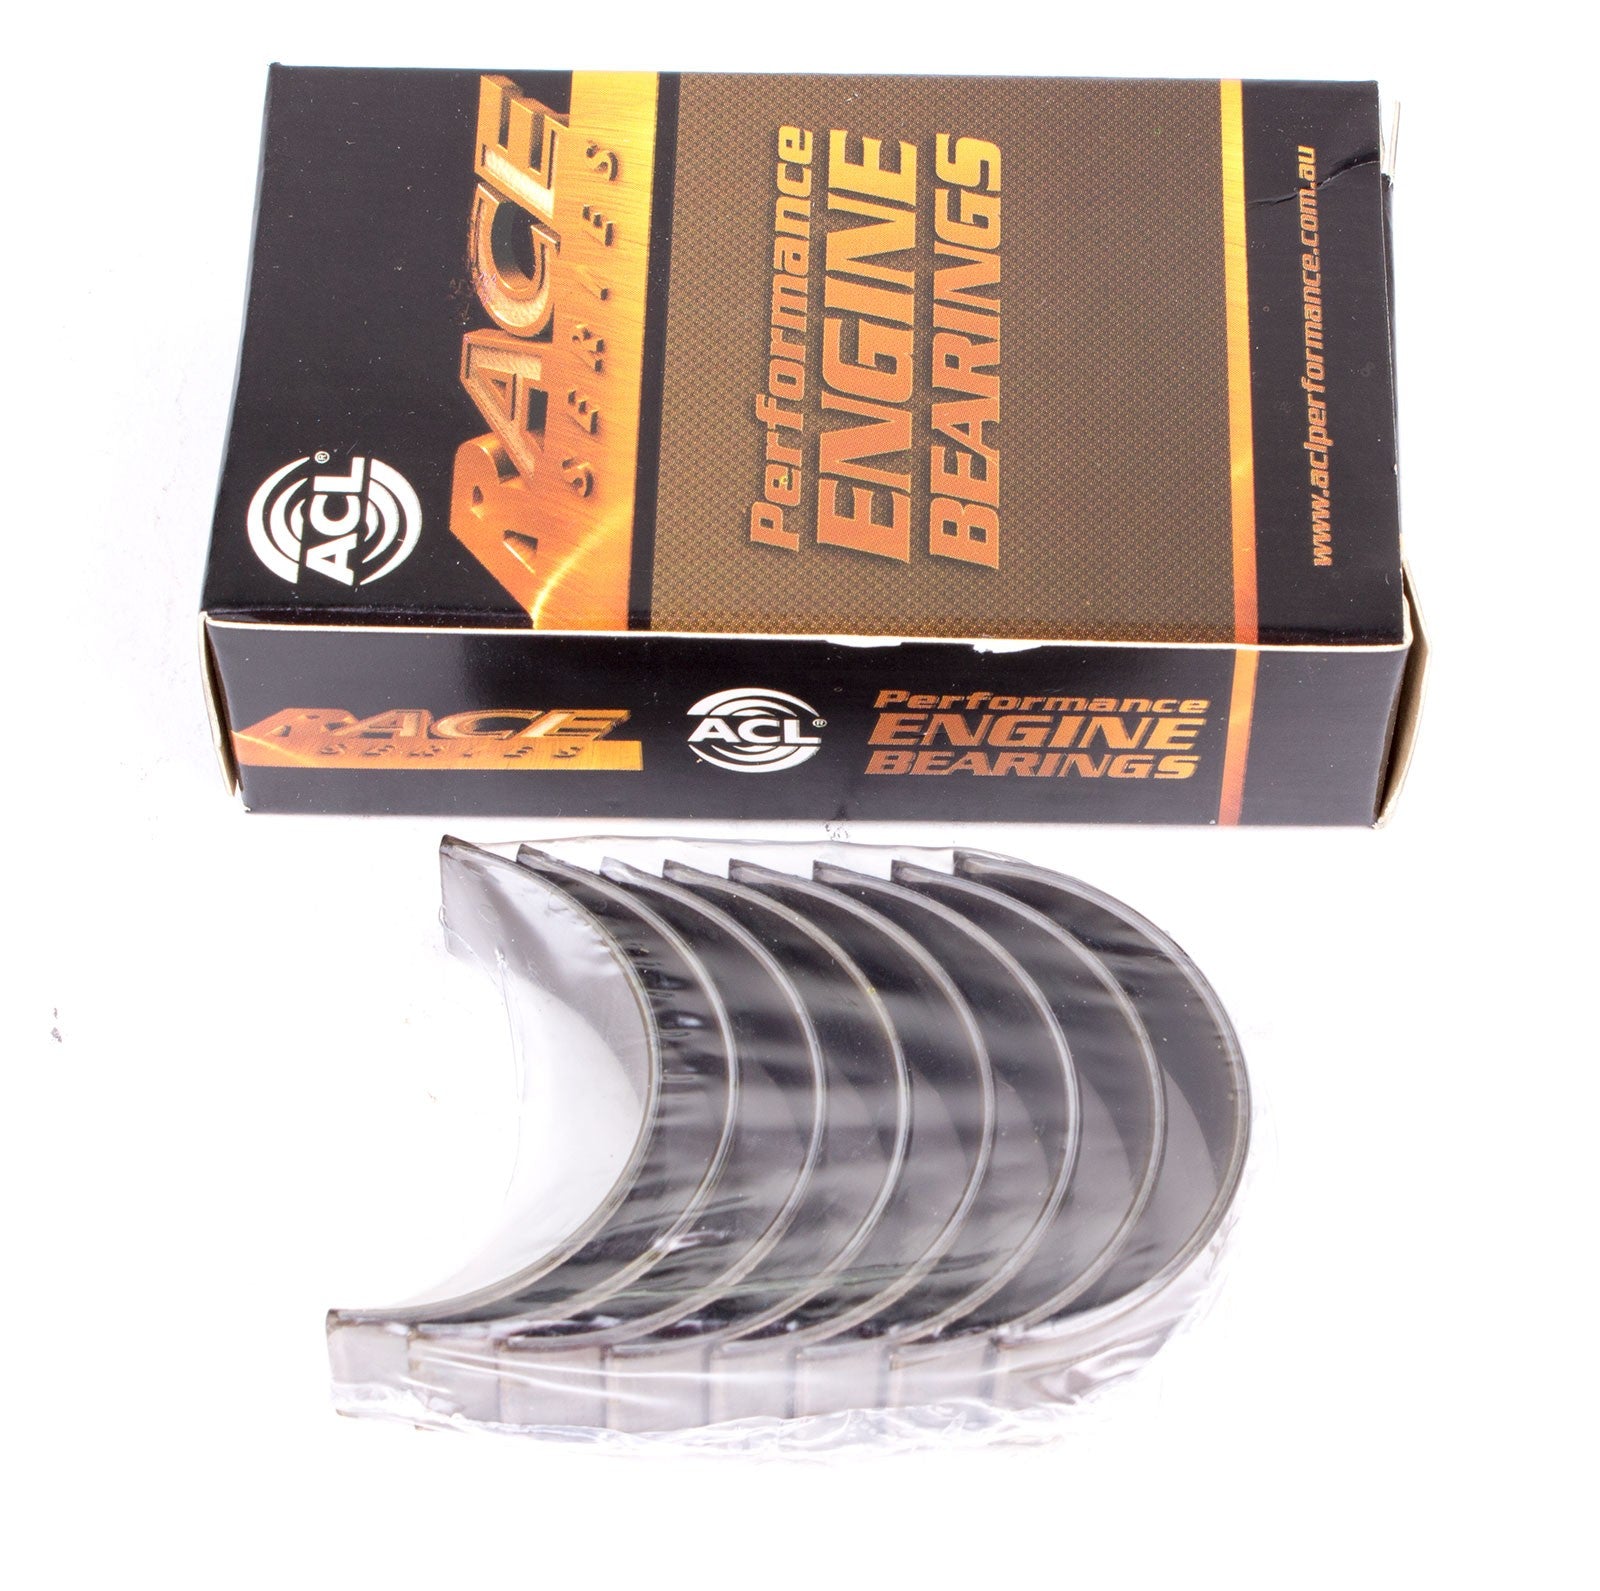 ACL 7M2092H-001 Main bearing set (ACL Race Series) Photo-0 